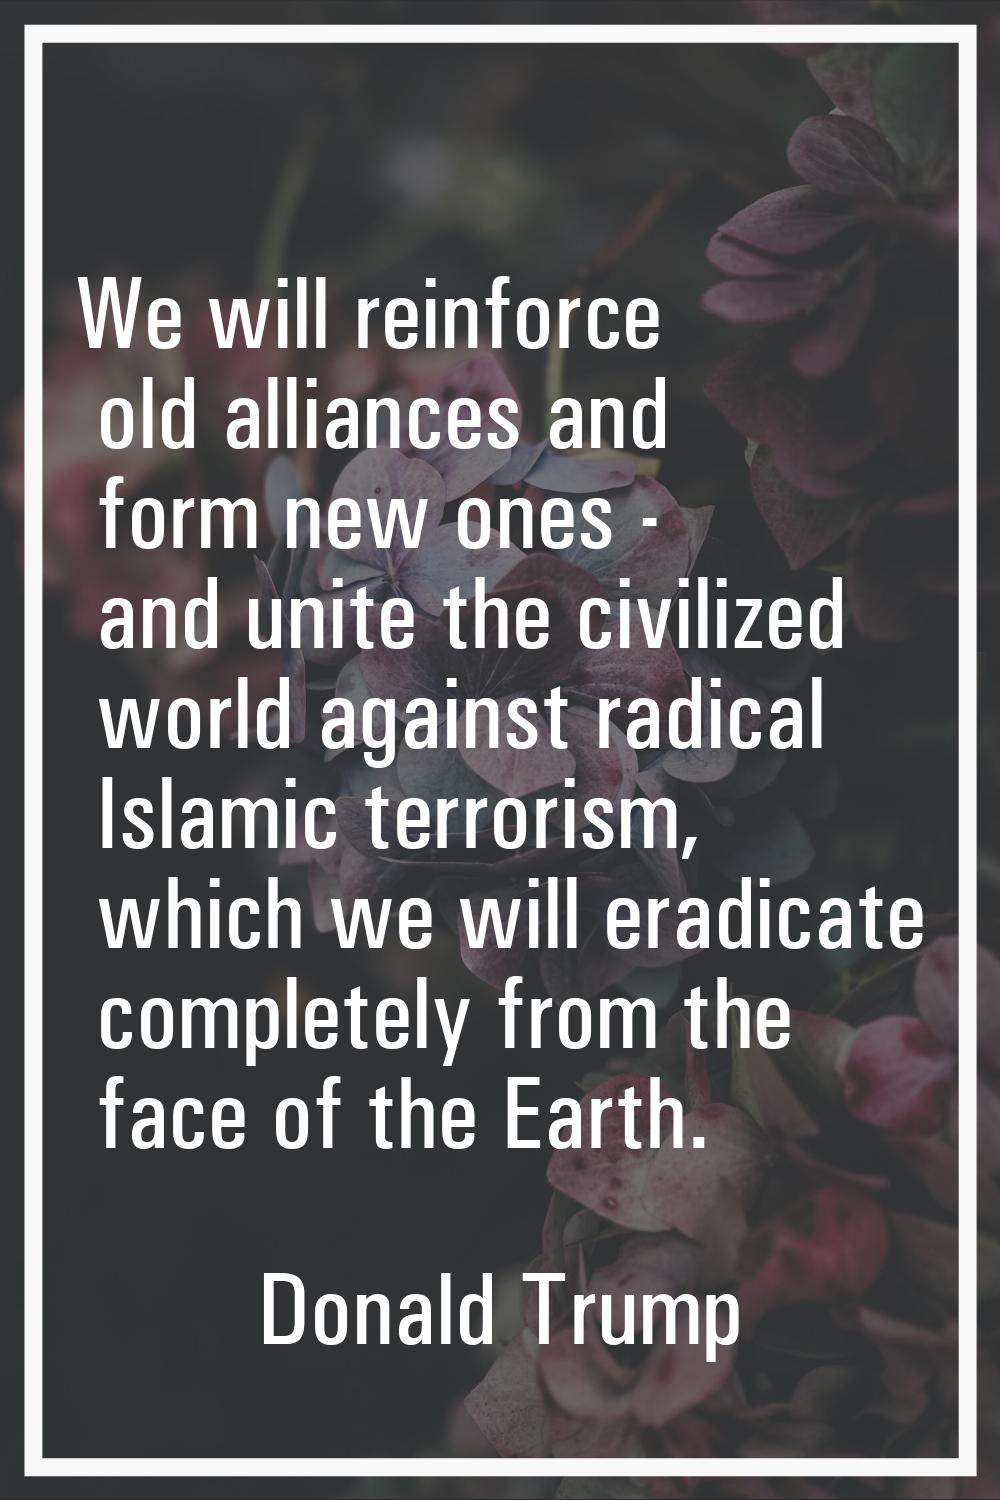 We will reinforce old alliances and form new ones - and unite the civilized world against radical I